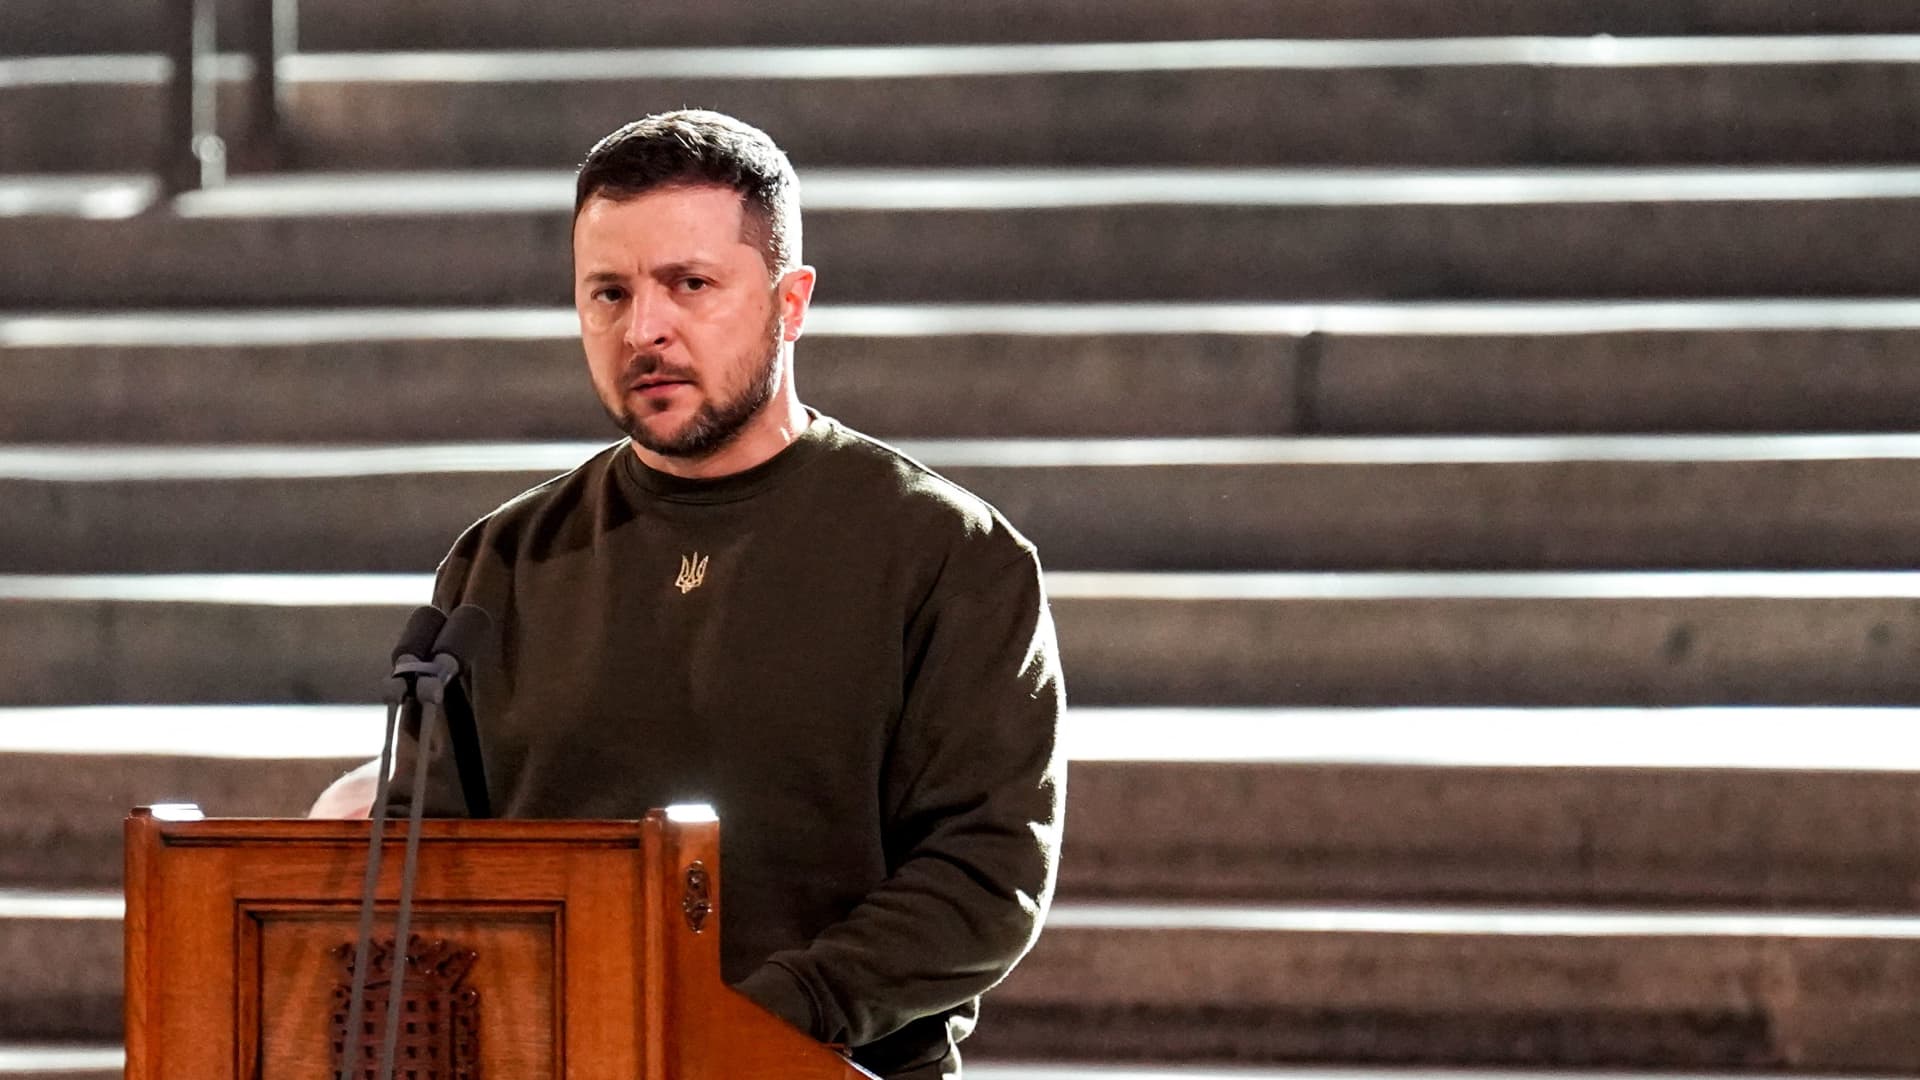 Ukraine's President Volodymyr Zelenskyy addresses British MPs in Westminster Hall, inside the Palace of Westminster in central London on February 8, 2023.